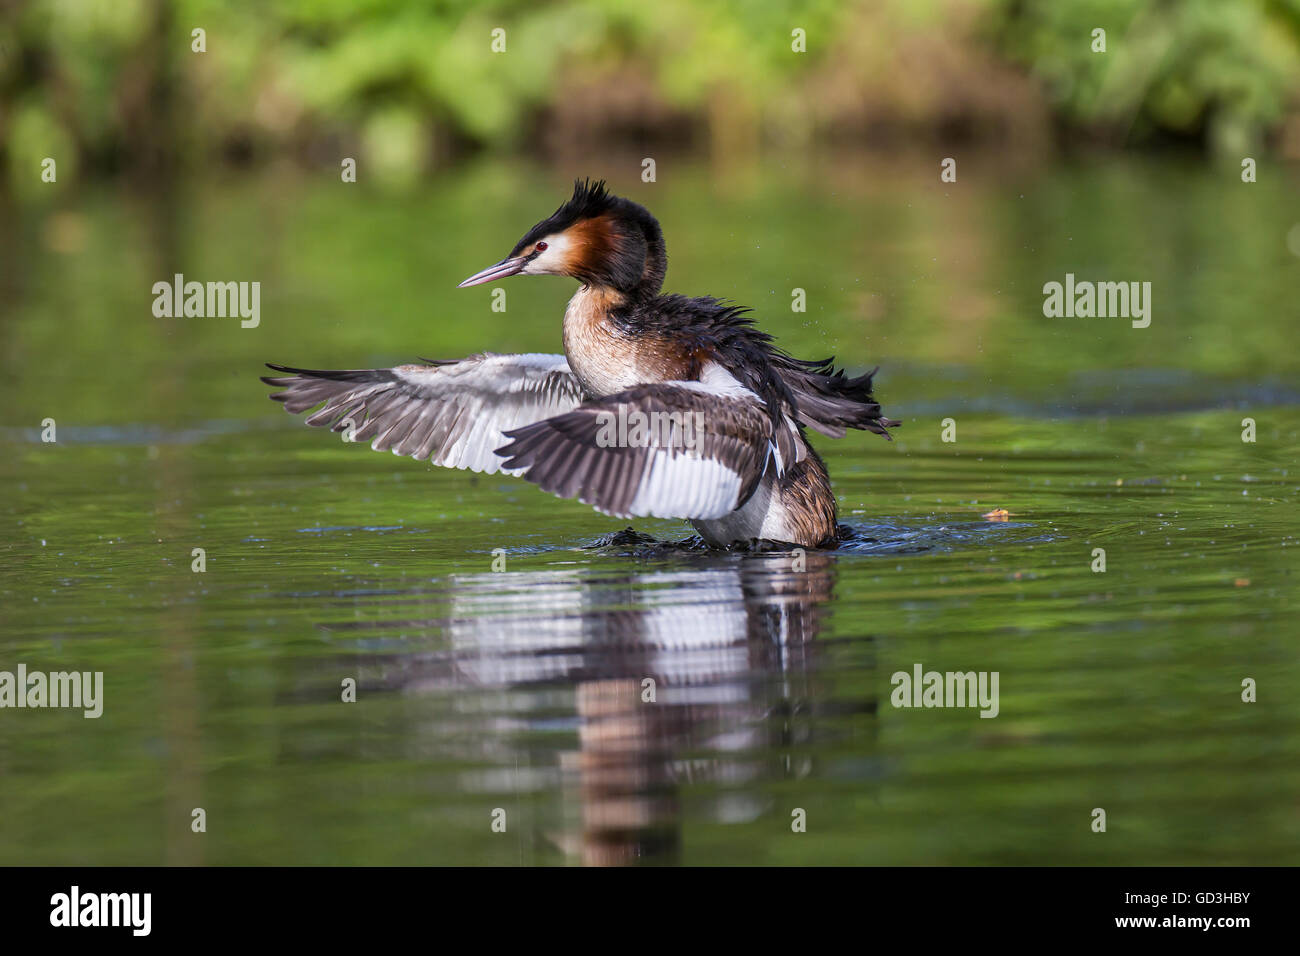 Great Crested Grebe (Podiceps cristatus) in water spreading its wings, side view, Nettetal, North Rhine-Westphalia, Germany Stock Photo